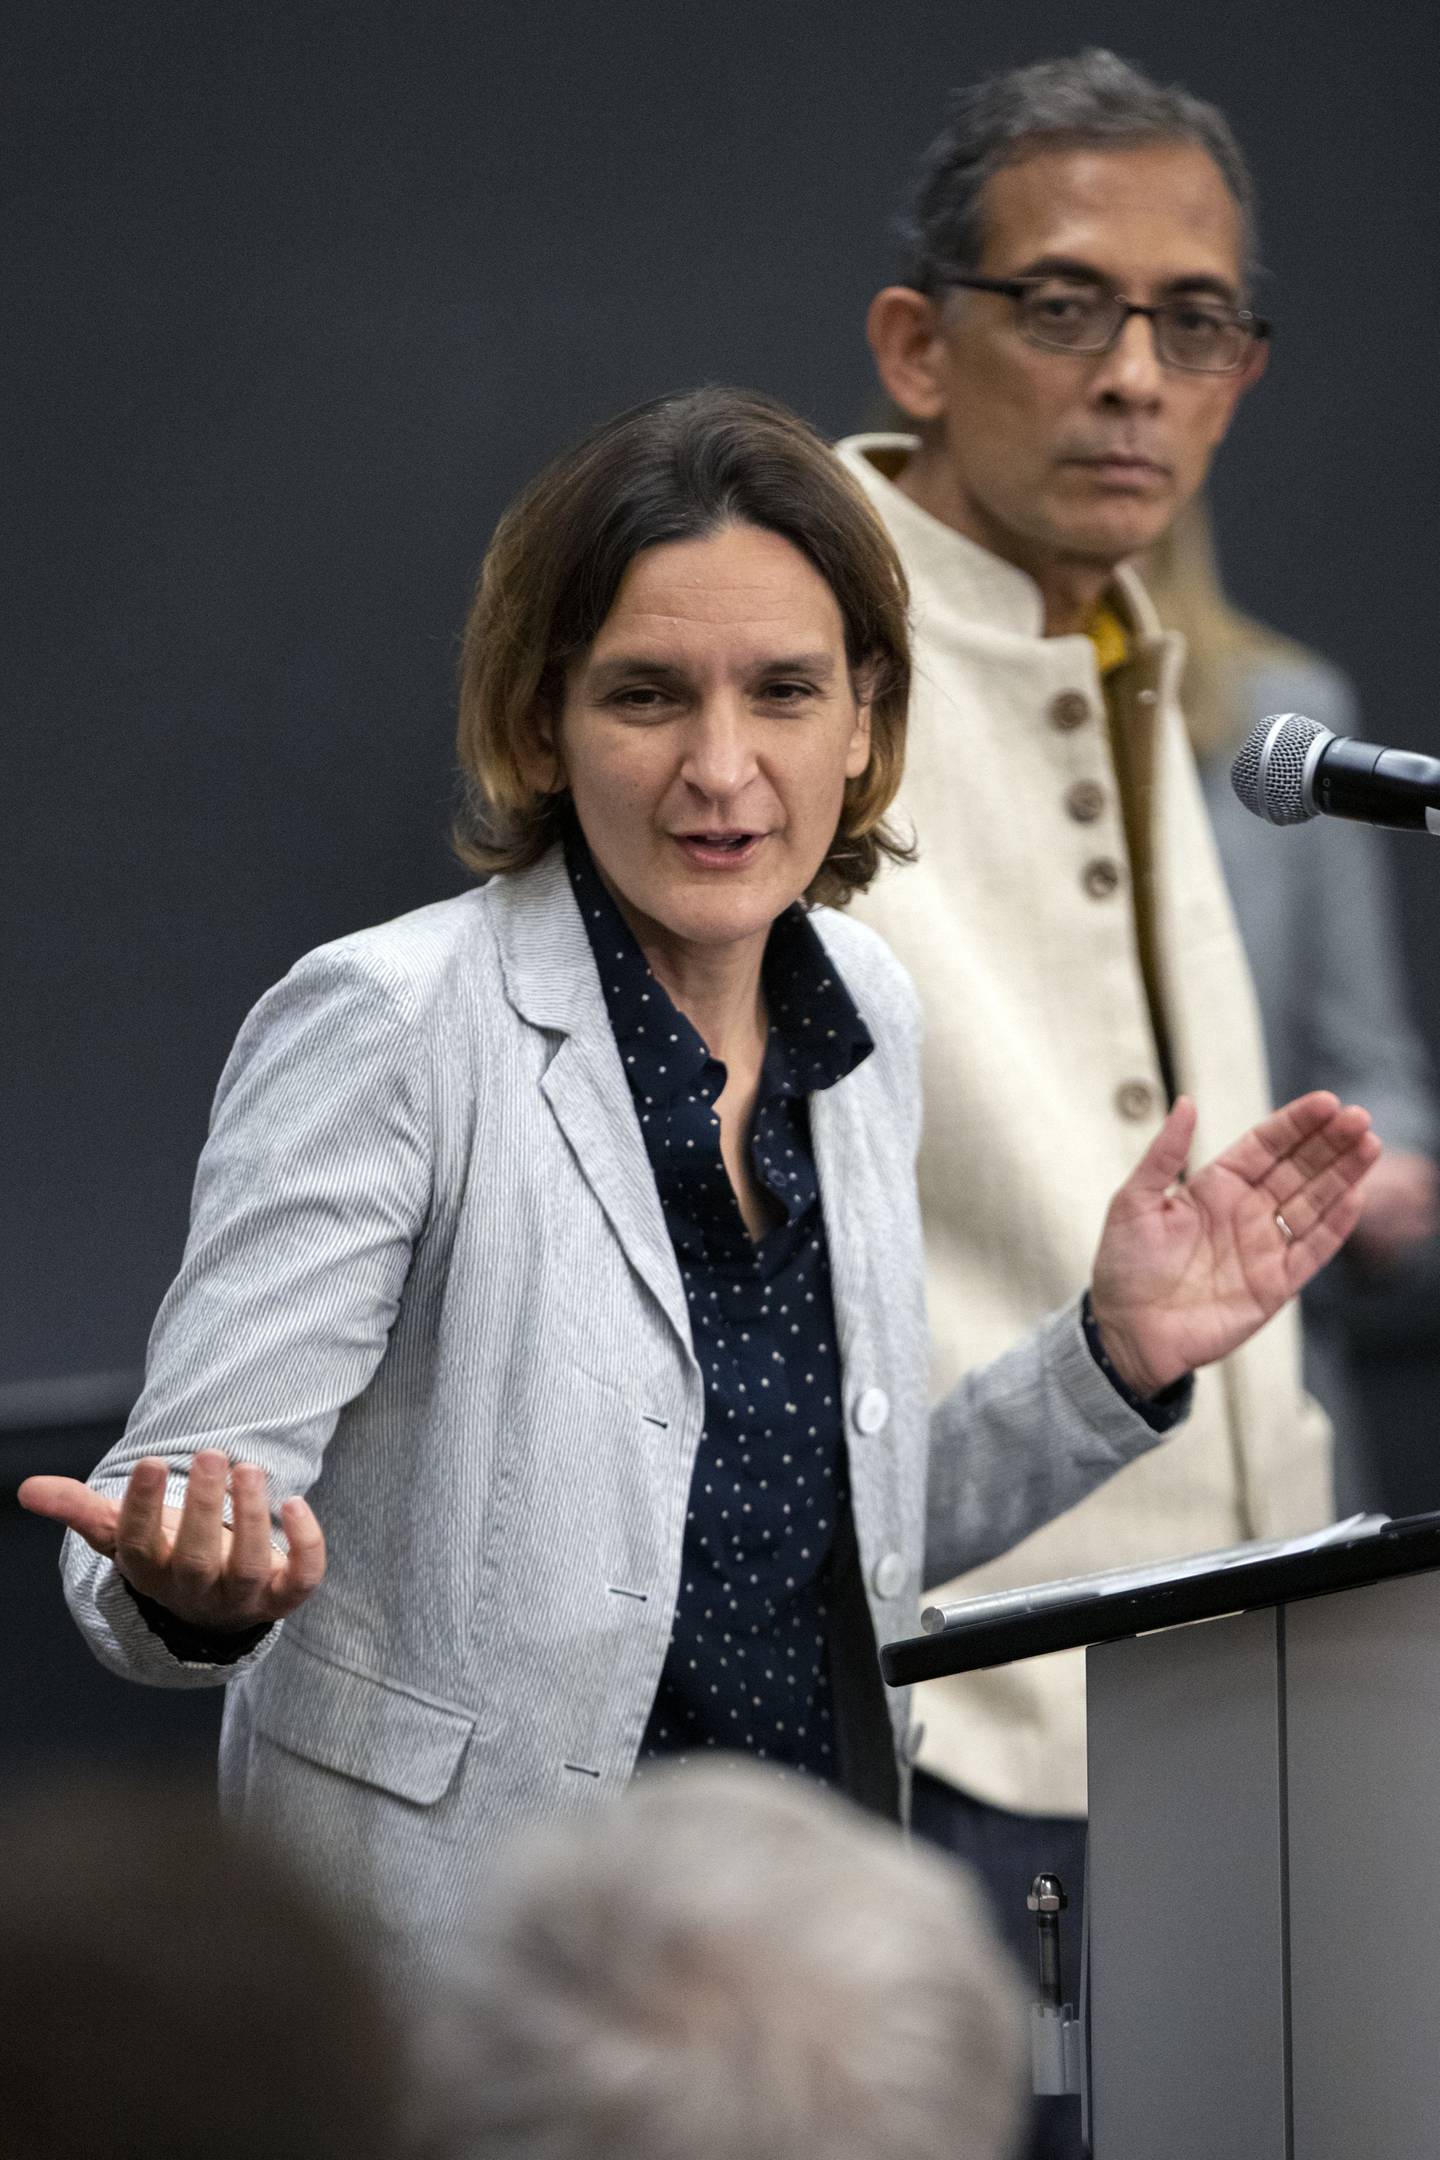 Esther Duflo, left, and Abhijit Banerjee speak during a news conference at Massachusetts Institute of Technology in Cambridge, Mass., Monday, Oct. 14, 2019. Banerjee and Duflo, along with Harvard's Michael Kremer, were awarded the 2019 Nobel Prize in economics for pioneering new ways to alleviate global poverty. (AP Photo/Michael Dwyer)